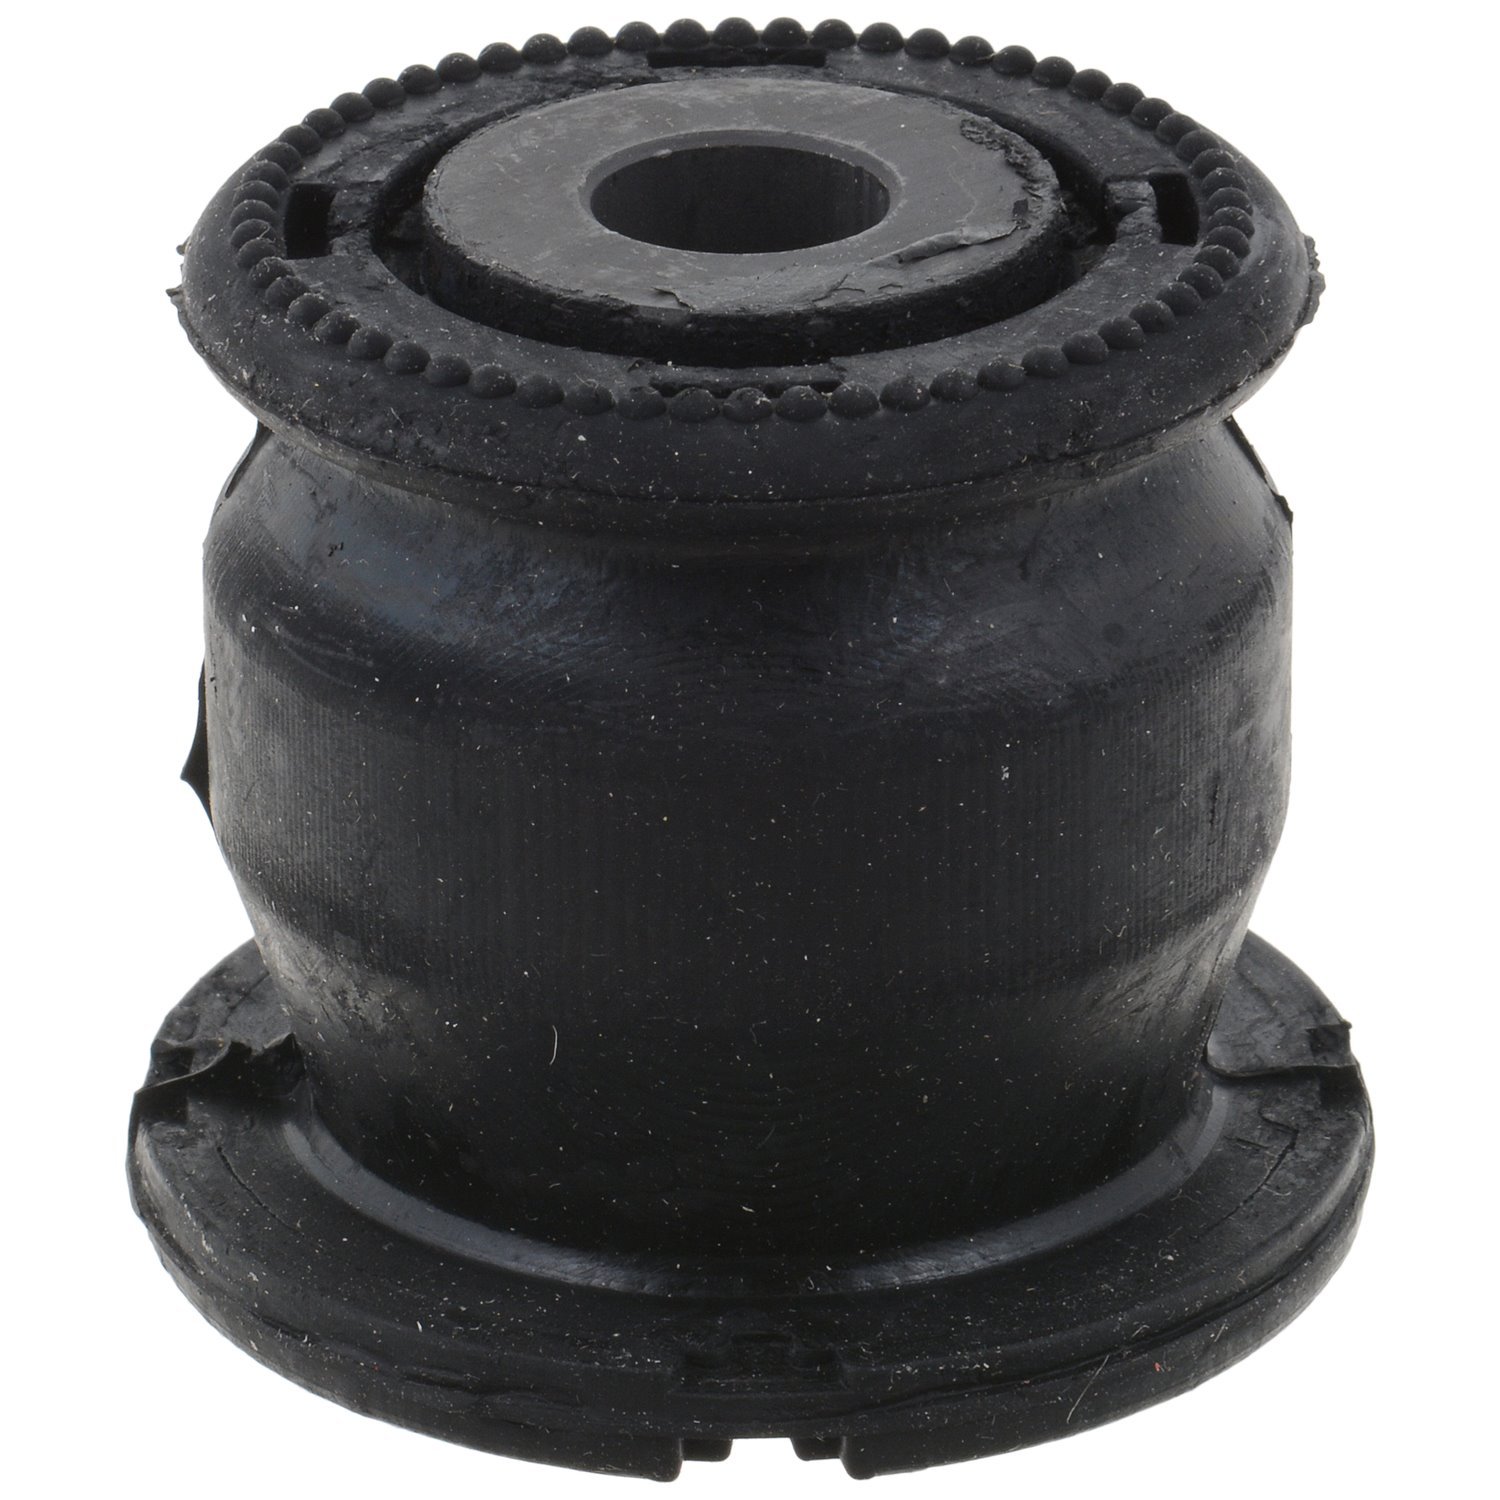 JBU1850 Control Arm Bushing Fits Select Honda Models, Position: Left/Driver or Right/Passenger, Rear Lower Outer Rearward